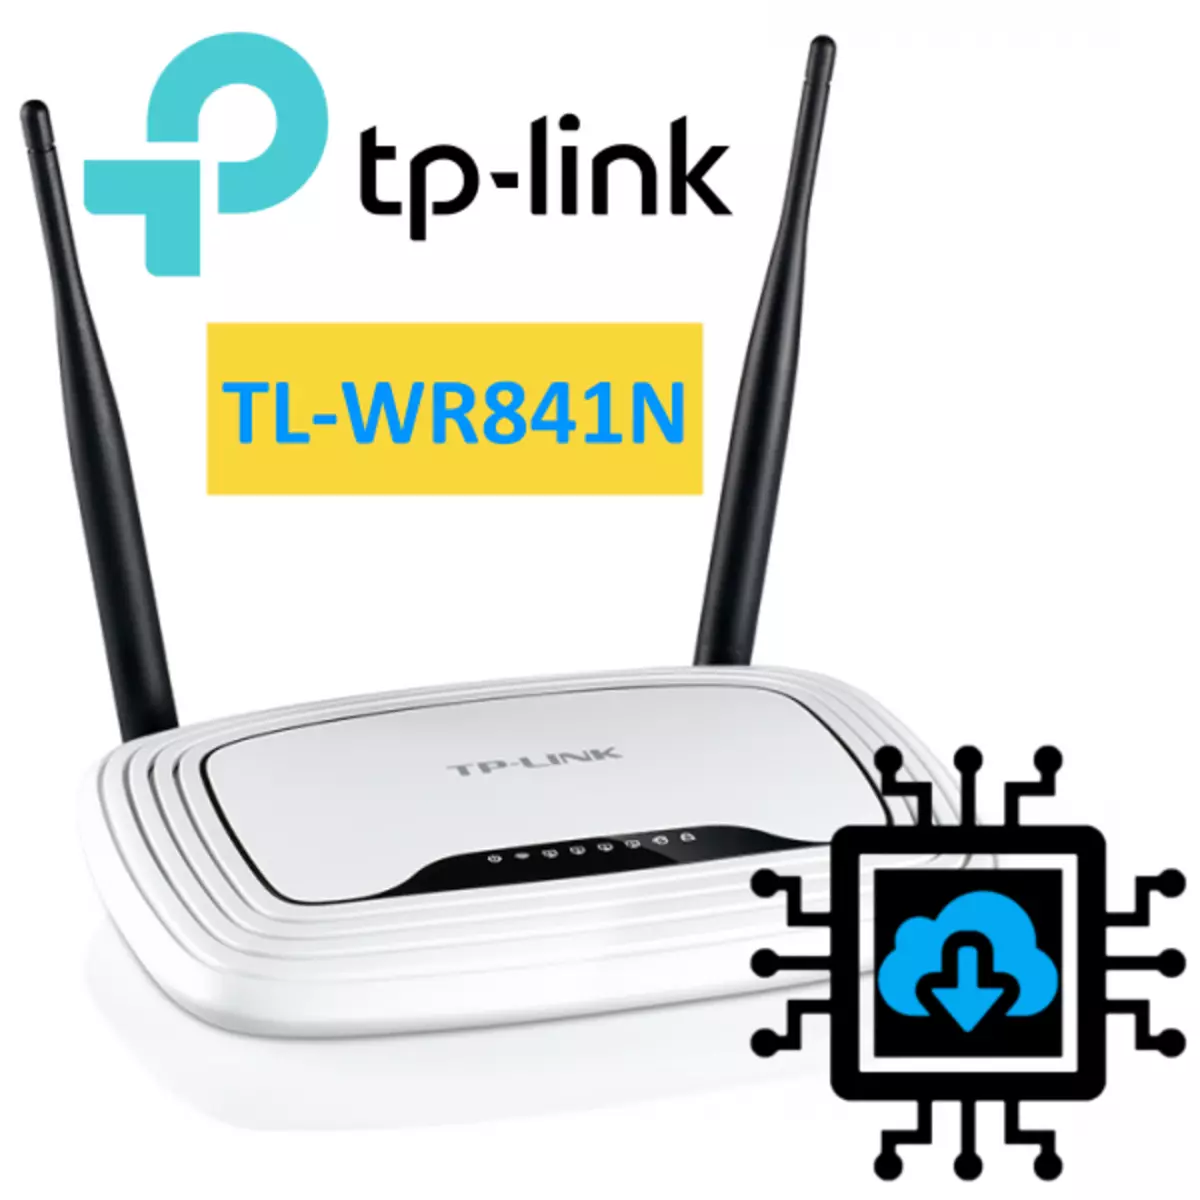 TP-Link TL-WR841N Router Formware